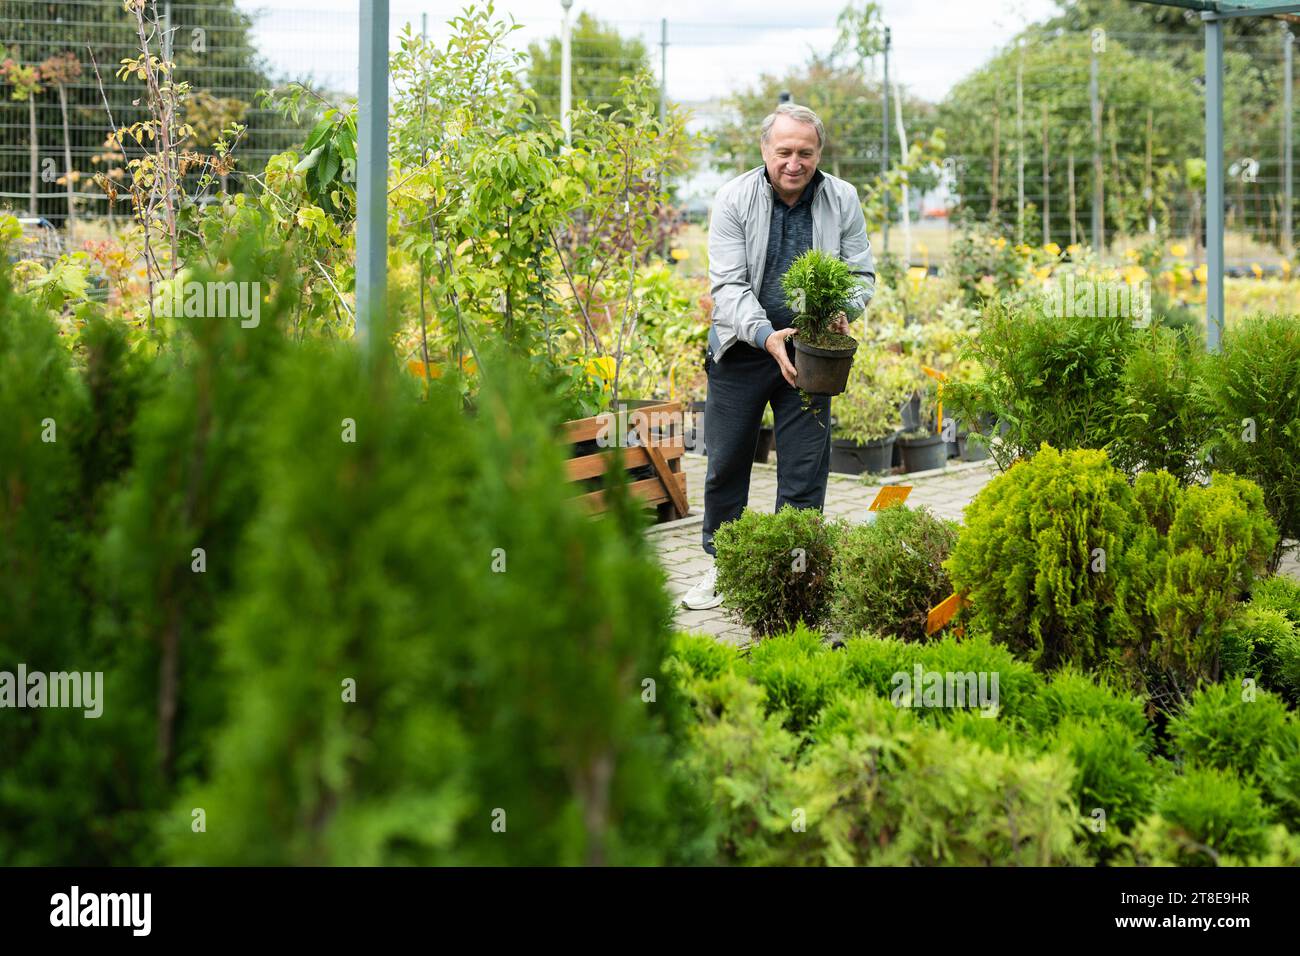 Elderly man holds a pot of Goldcrest Vilma cupressus in his hands at the bazaar Stock Photo